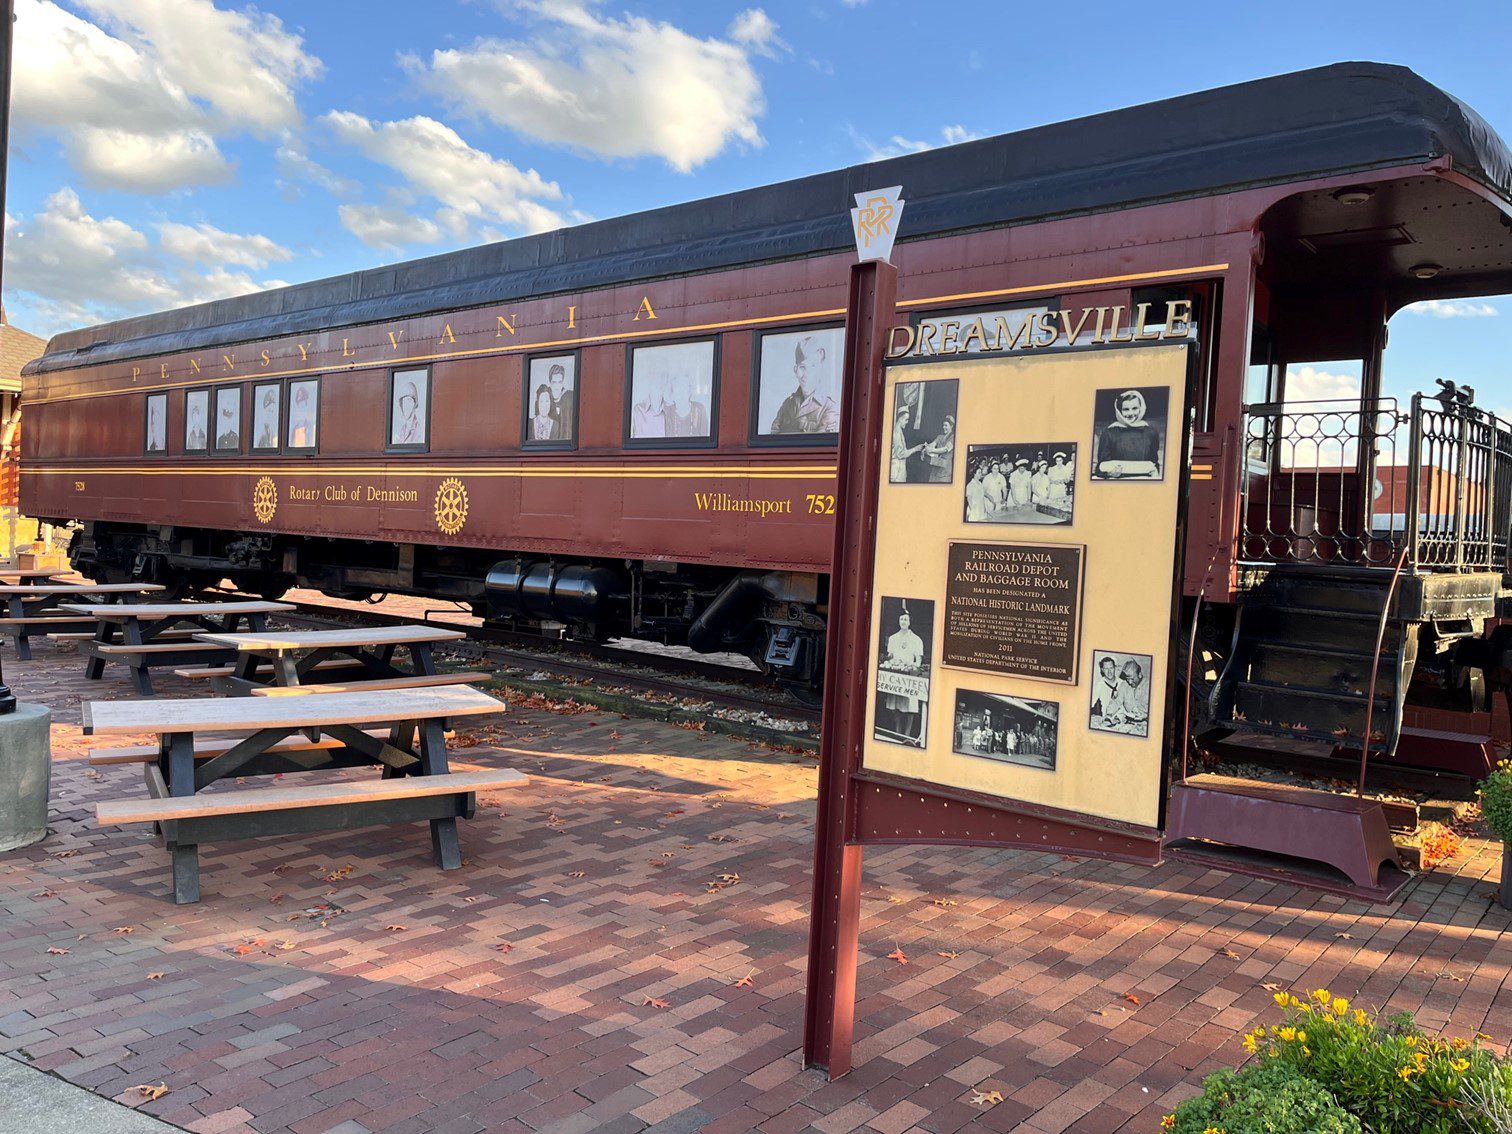 An outdoor picture of a Railroad car on a brick road with benches nearby.